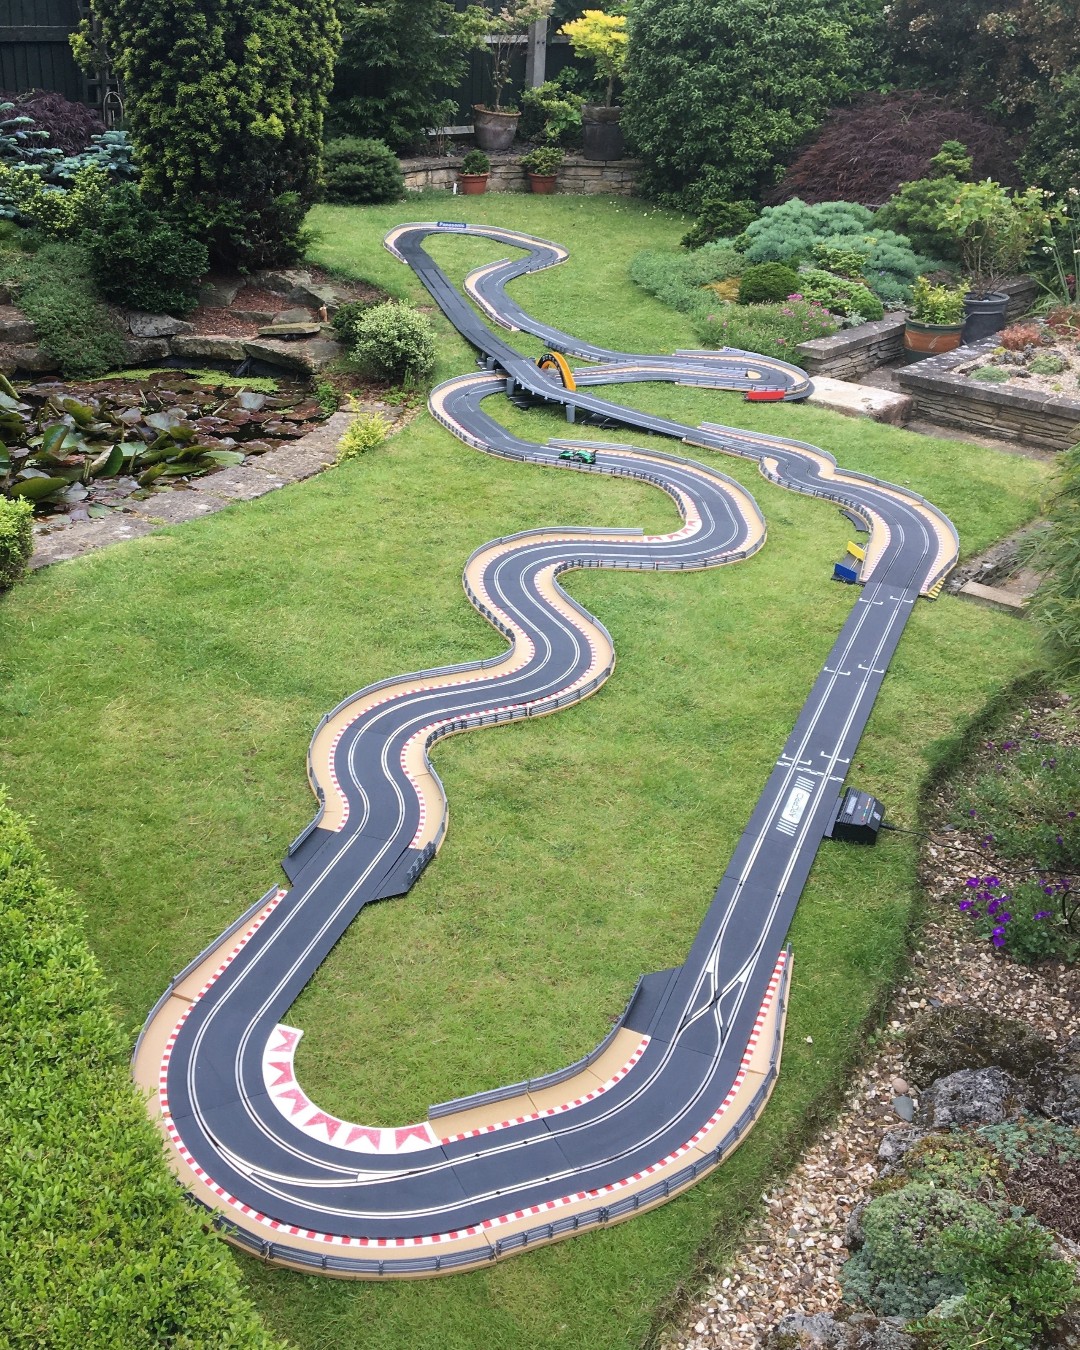 Scalextric on X: Check out this amazing outdoor Suzuka Circuit replica  created by Andy! 👏 Keep sending in your layout submissions, either in the  comments below or to marketing@scalextric.com 📸 #Scalextric #SuzukaCircuit